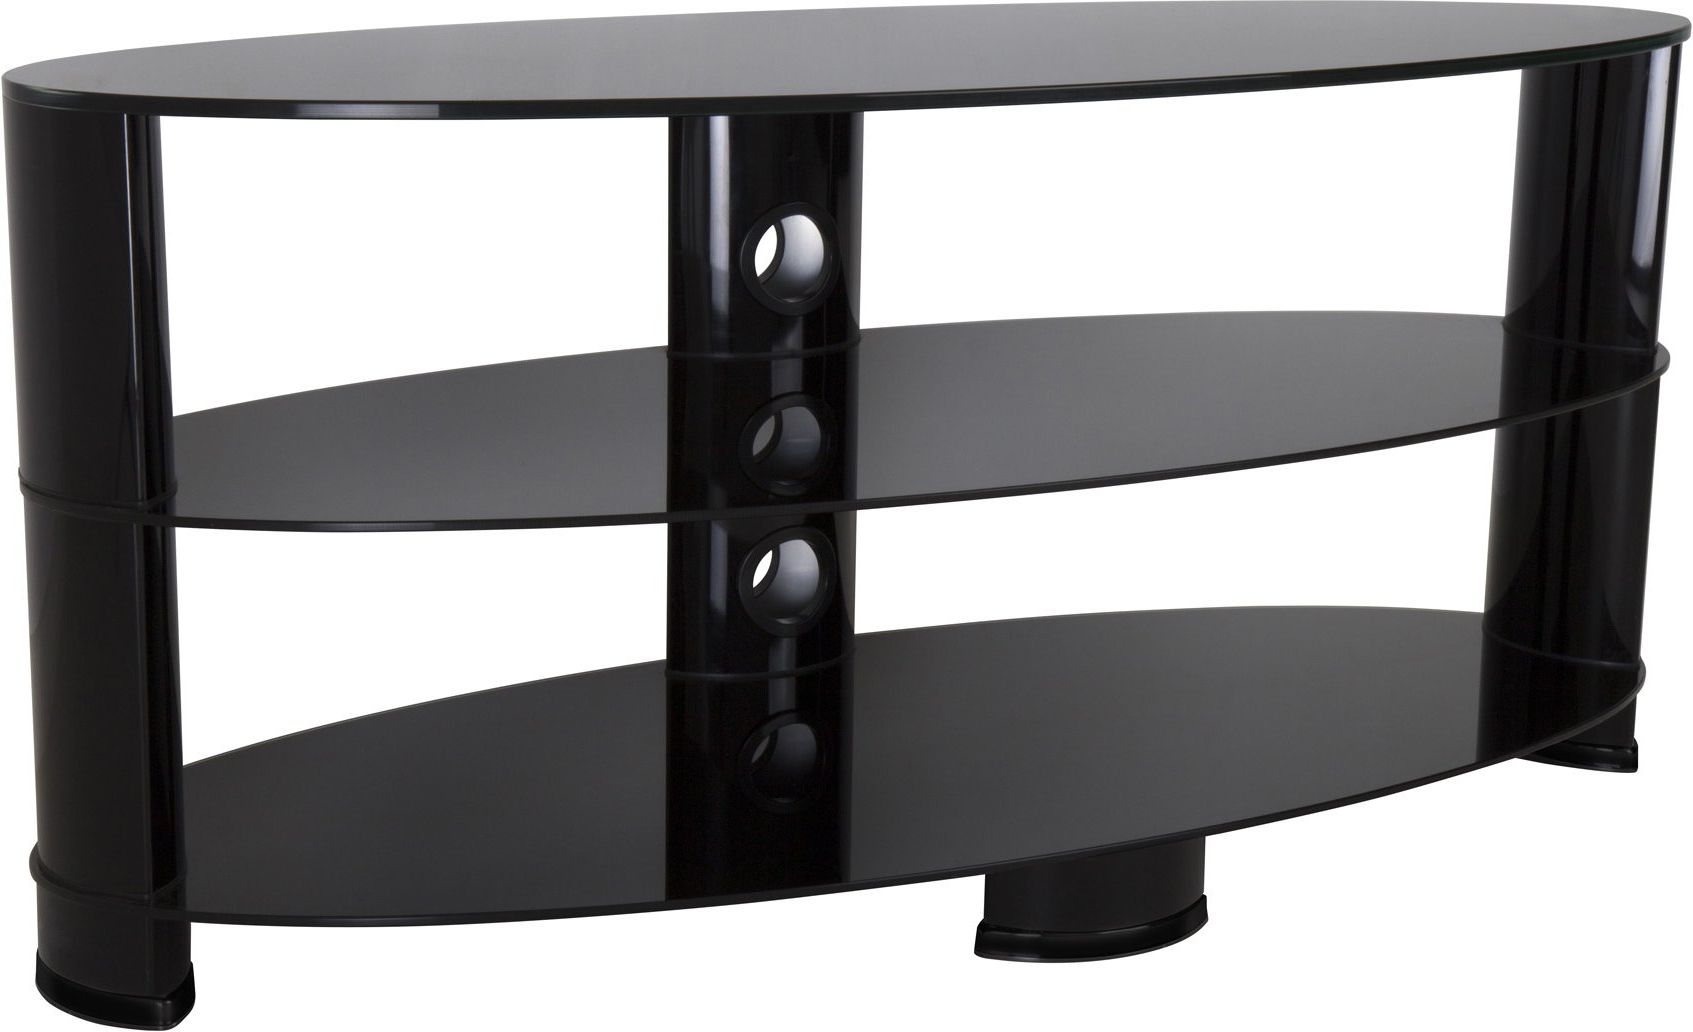 Avf Ovl1200bb Oval Glass Tv Stand For Tvs Up To 55 Inch – Black In Well Known Glass Oval Tv Stands (View 2 of 10)